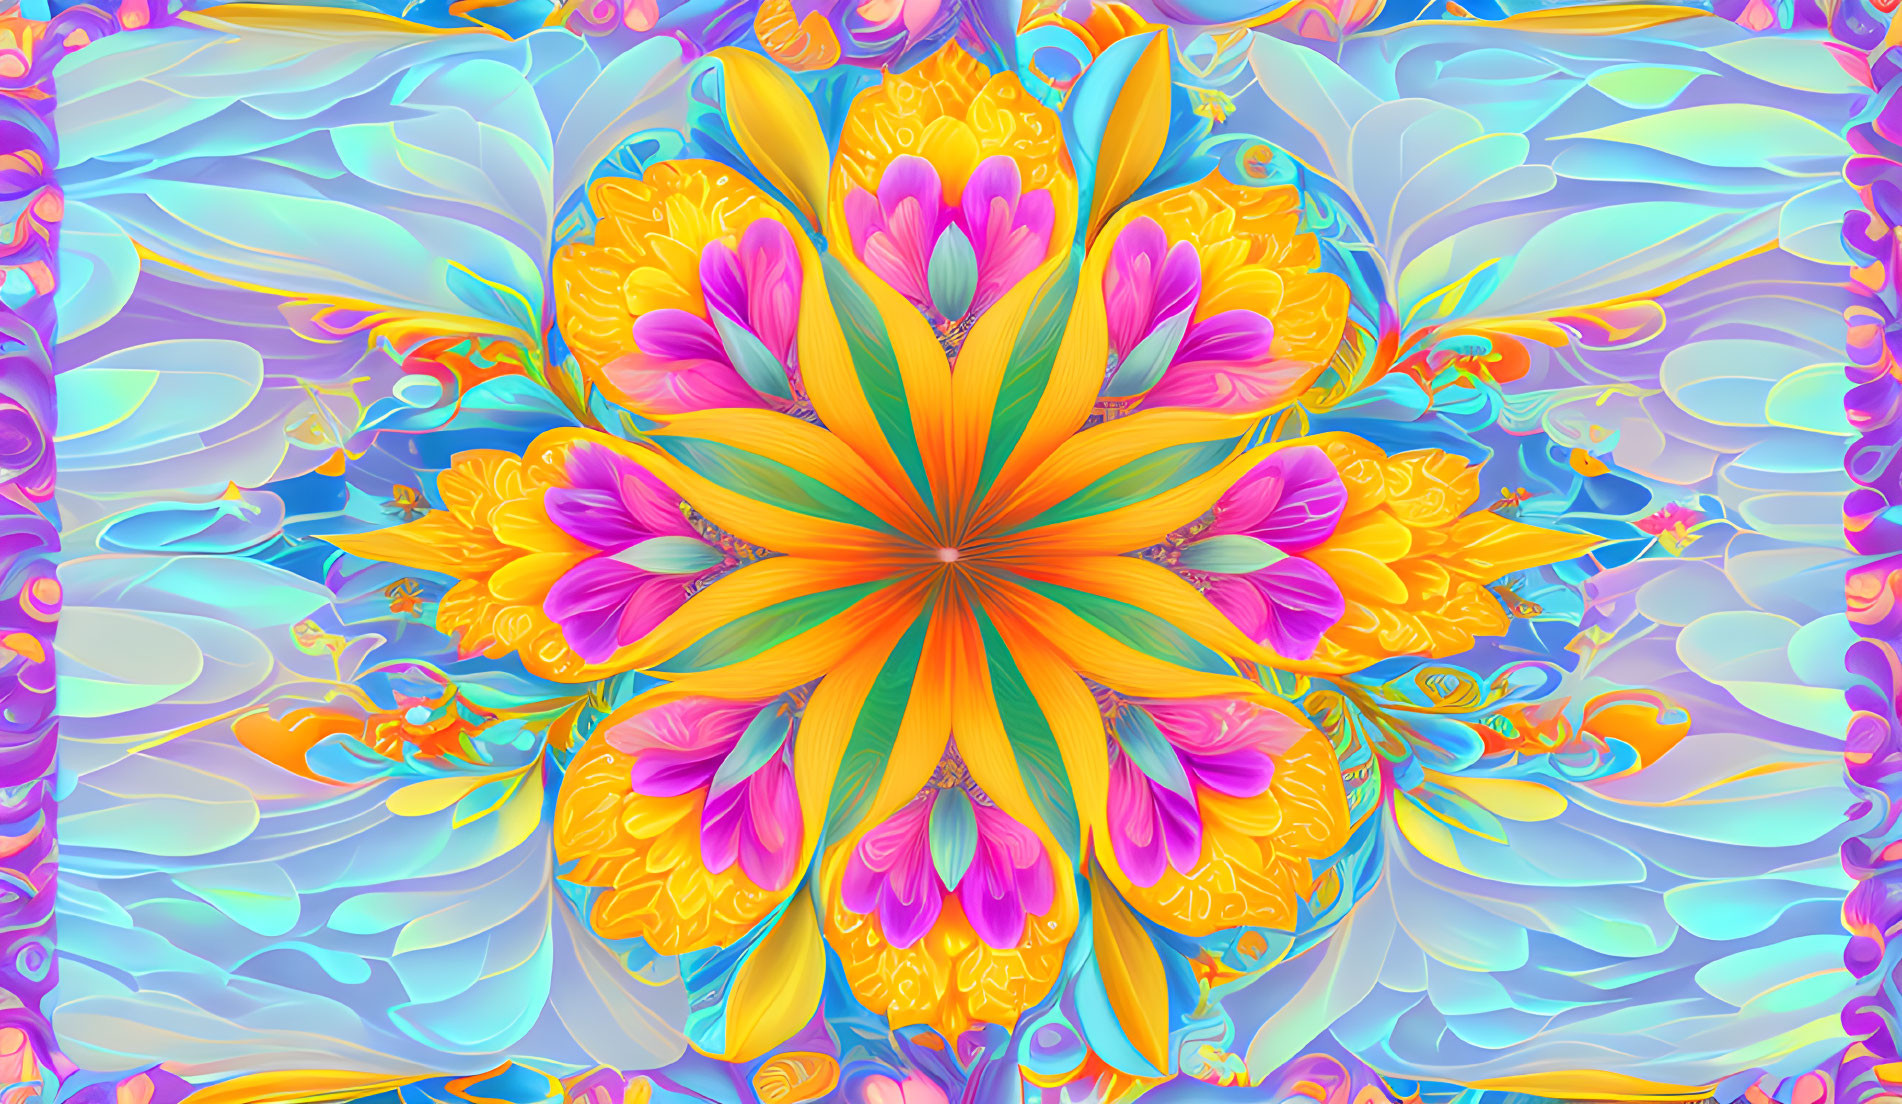 Colorful Floral Kaleidoscope Design in Blue, Orange, and Pink